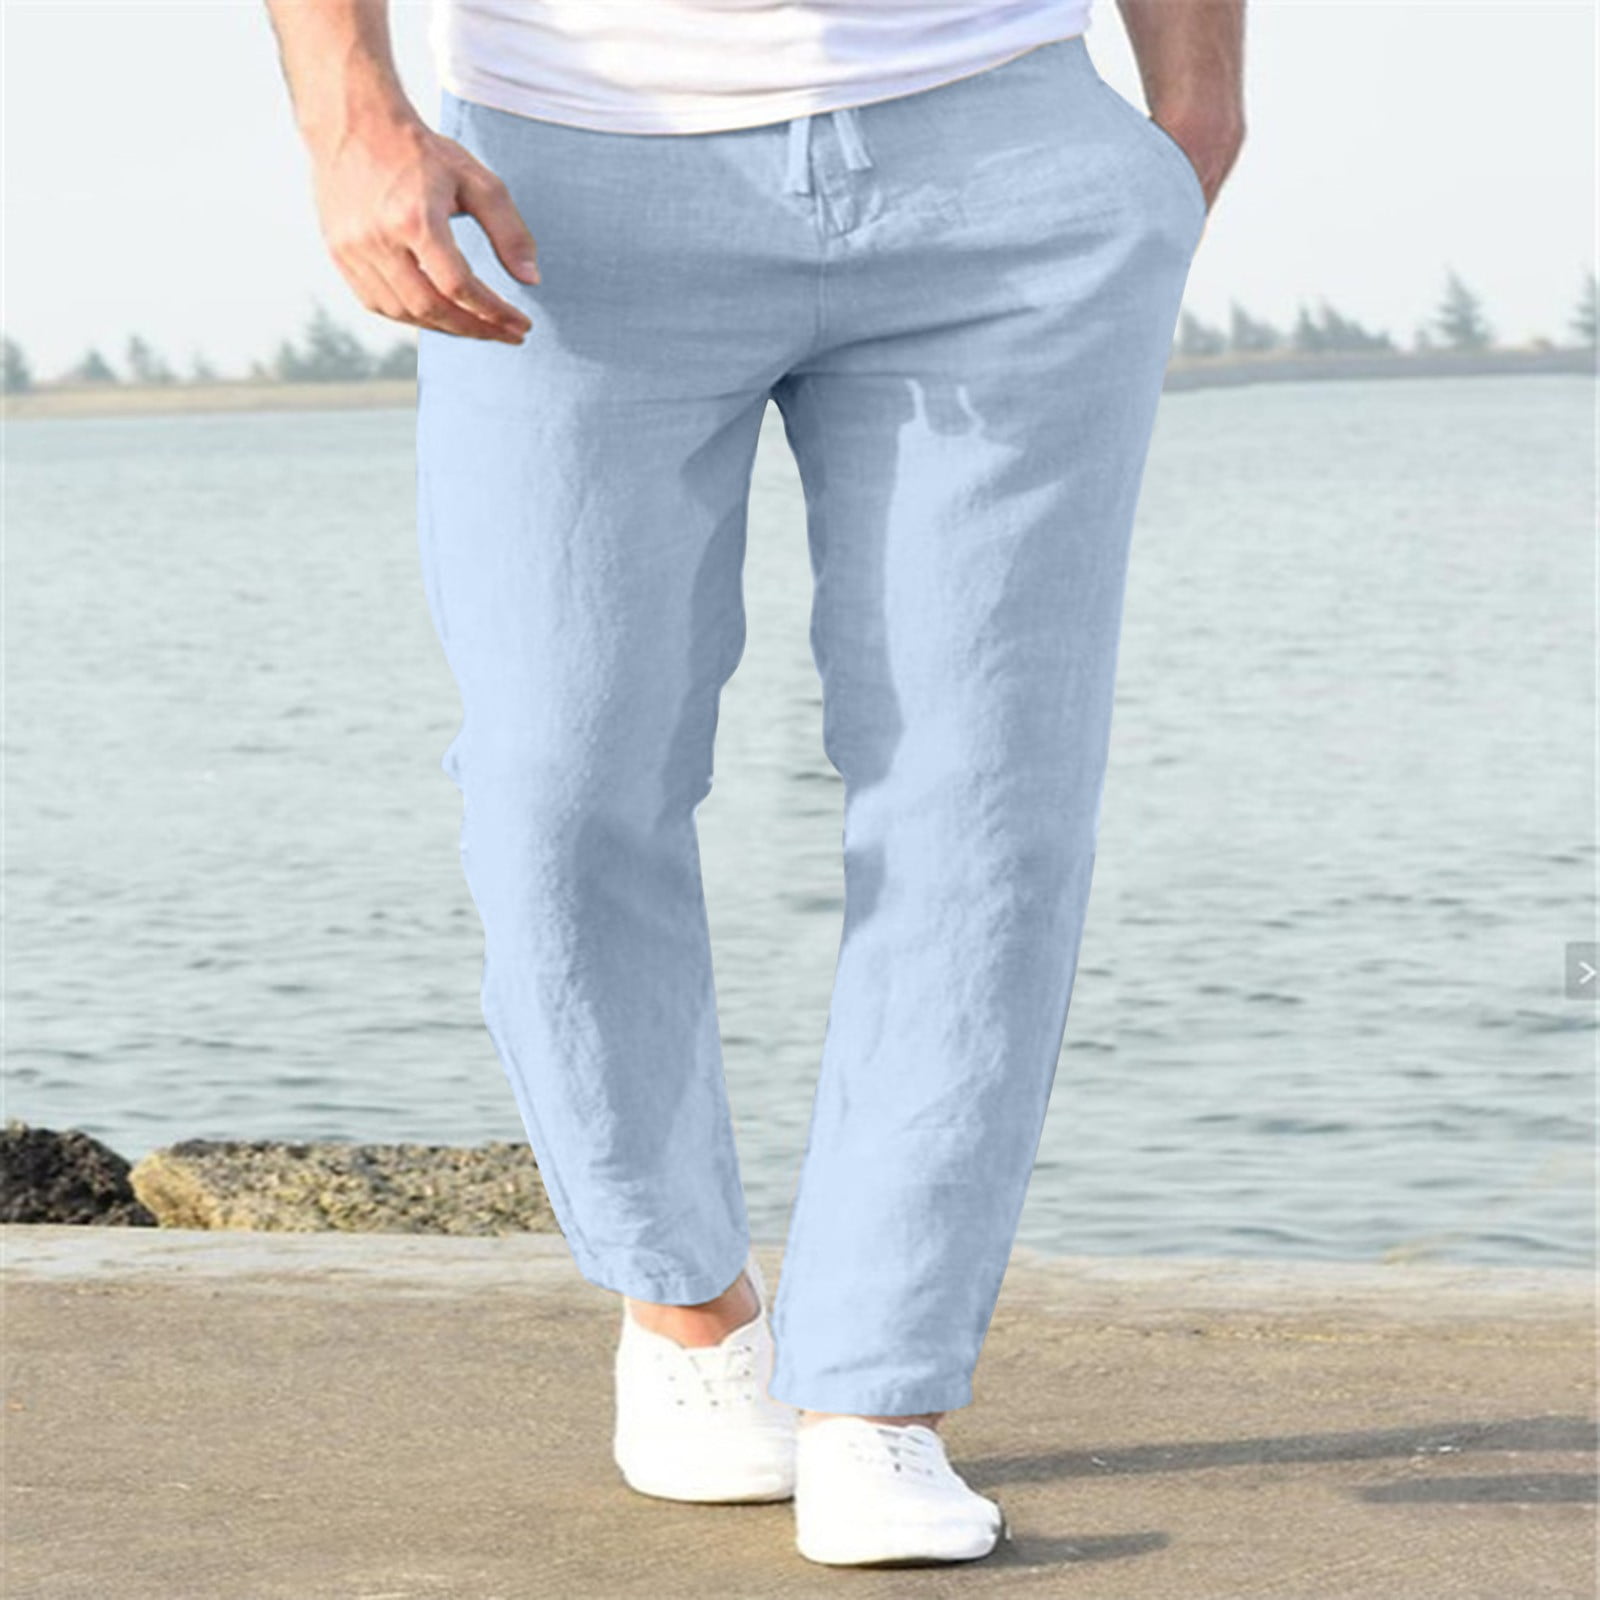 Pleated Linen Mix Palazzo Trousers in Light Blue - in the windsor.  Online-Shop